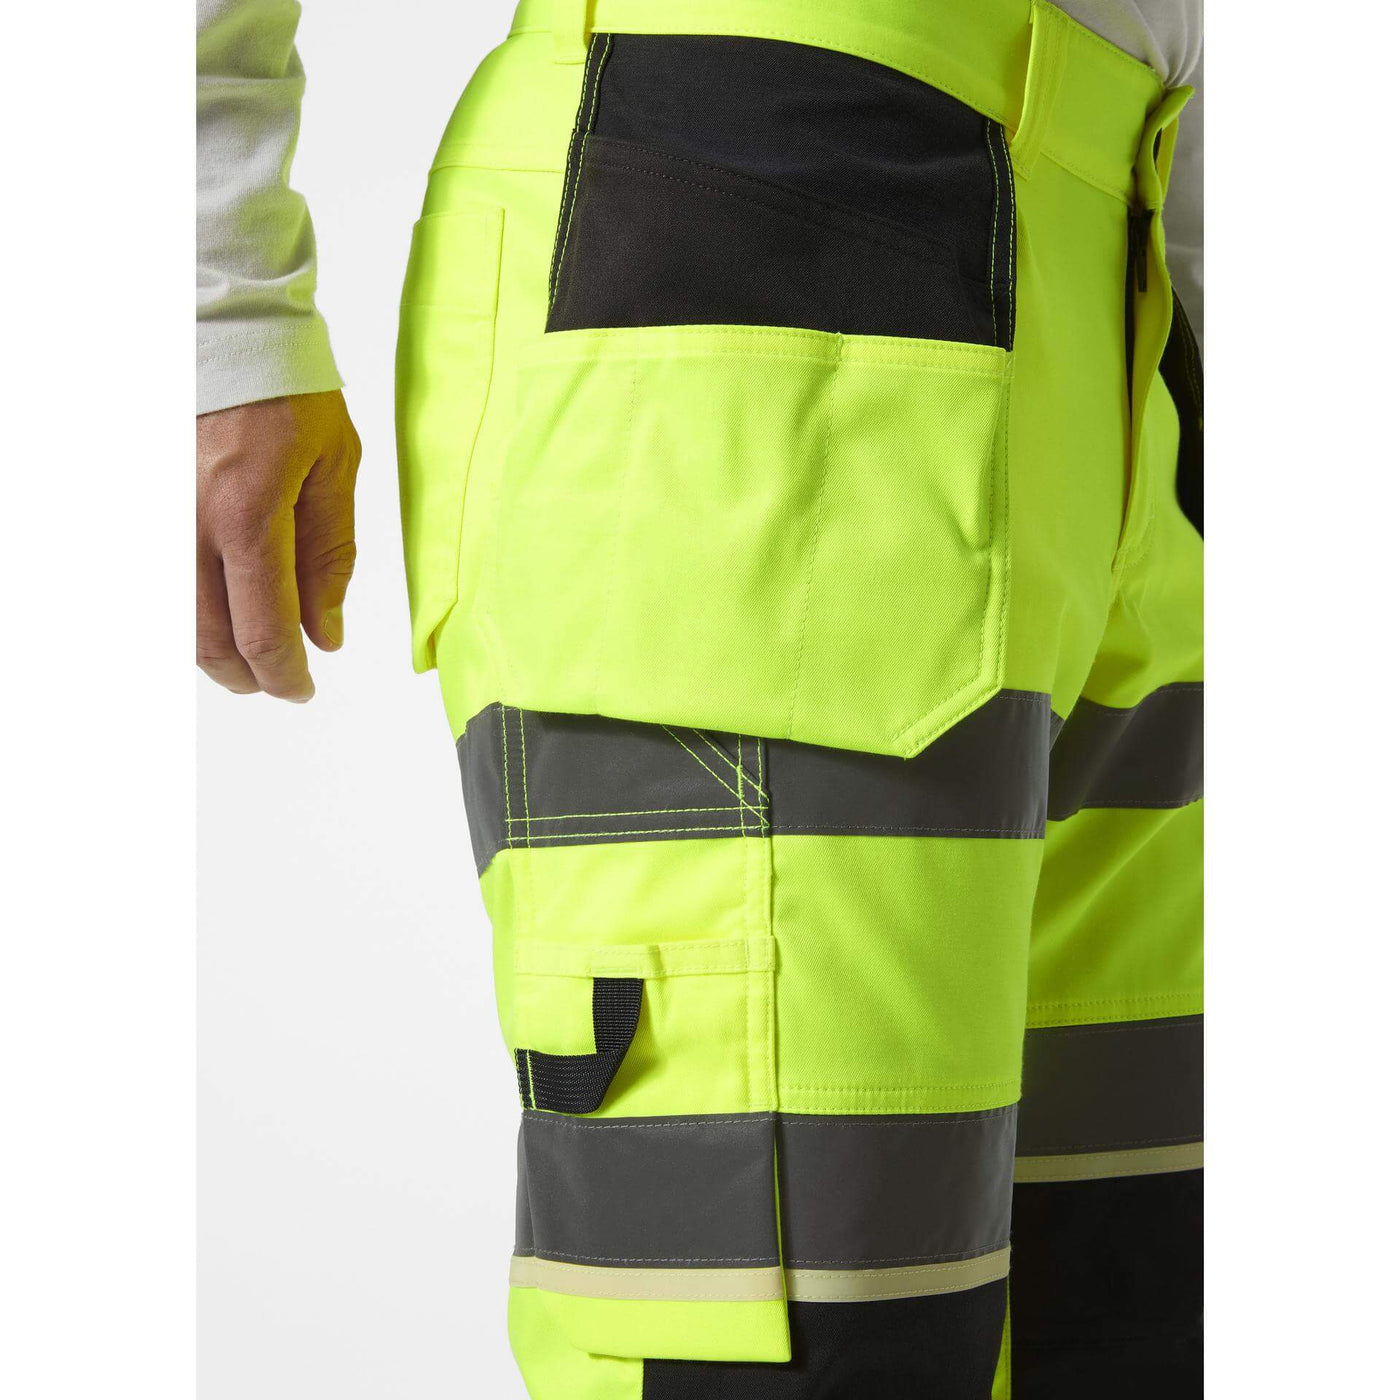 Helly Hansen UC-ME Hi-Vis Stretch Construction Pirate Trousers Yellow/Ebony Feature 1#colour_yellow-ebony